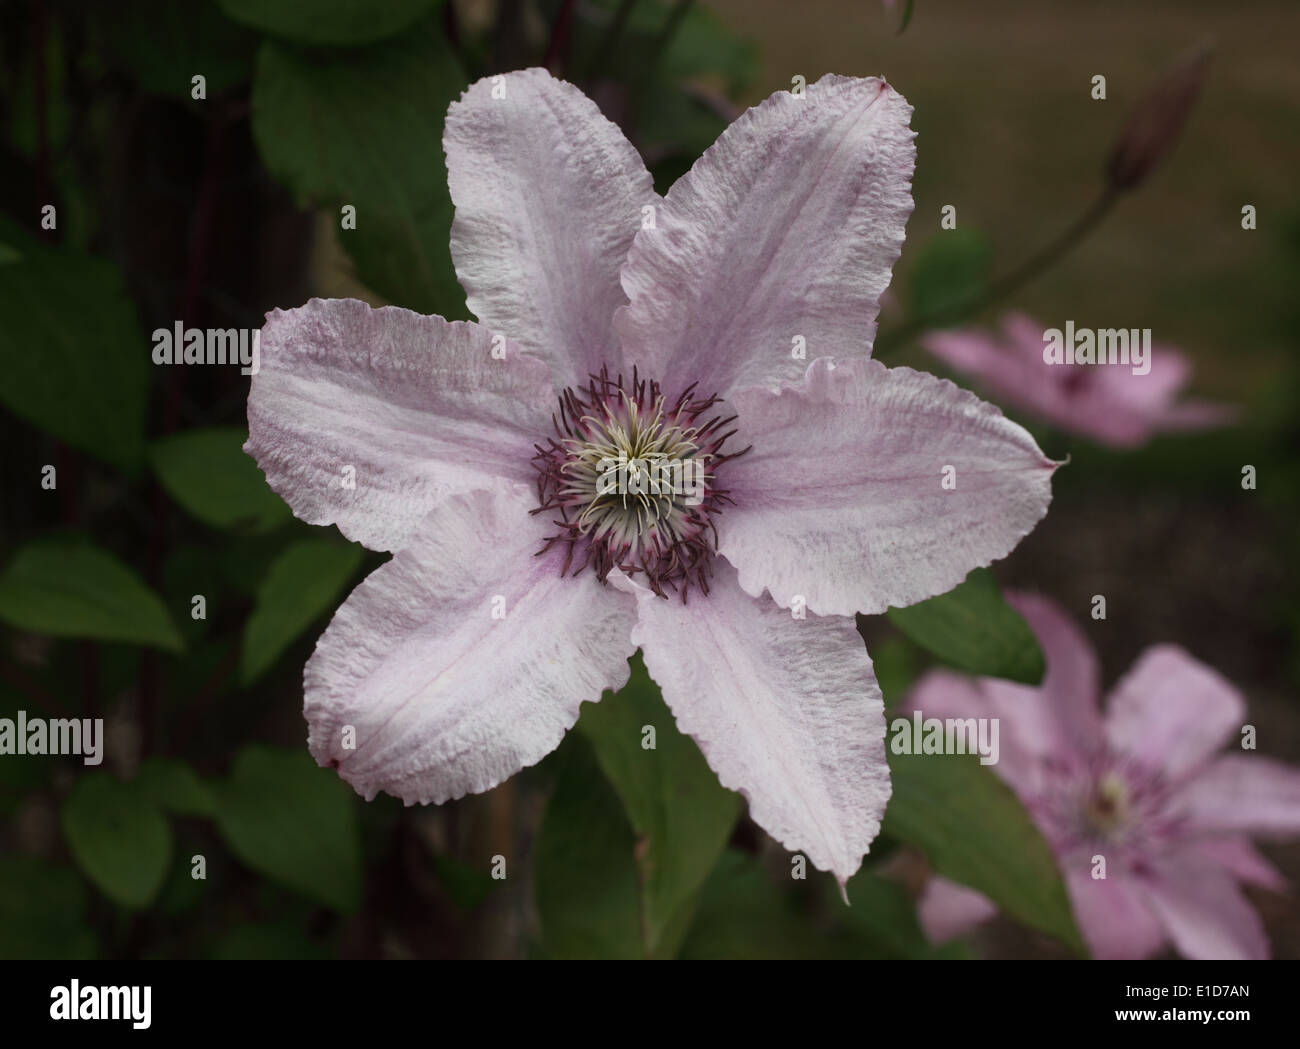 Clematis 'Hagley Hybrid' close up of flower Stock Photo